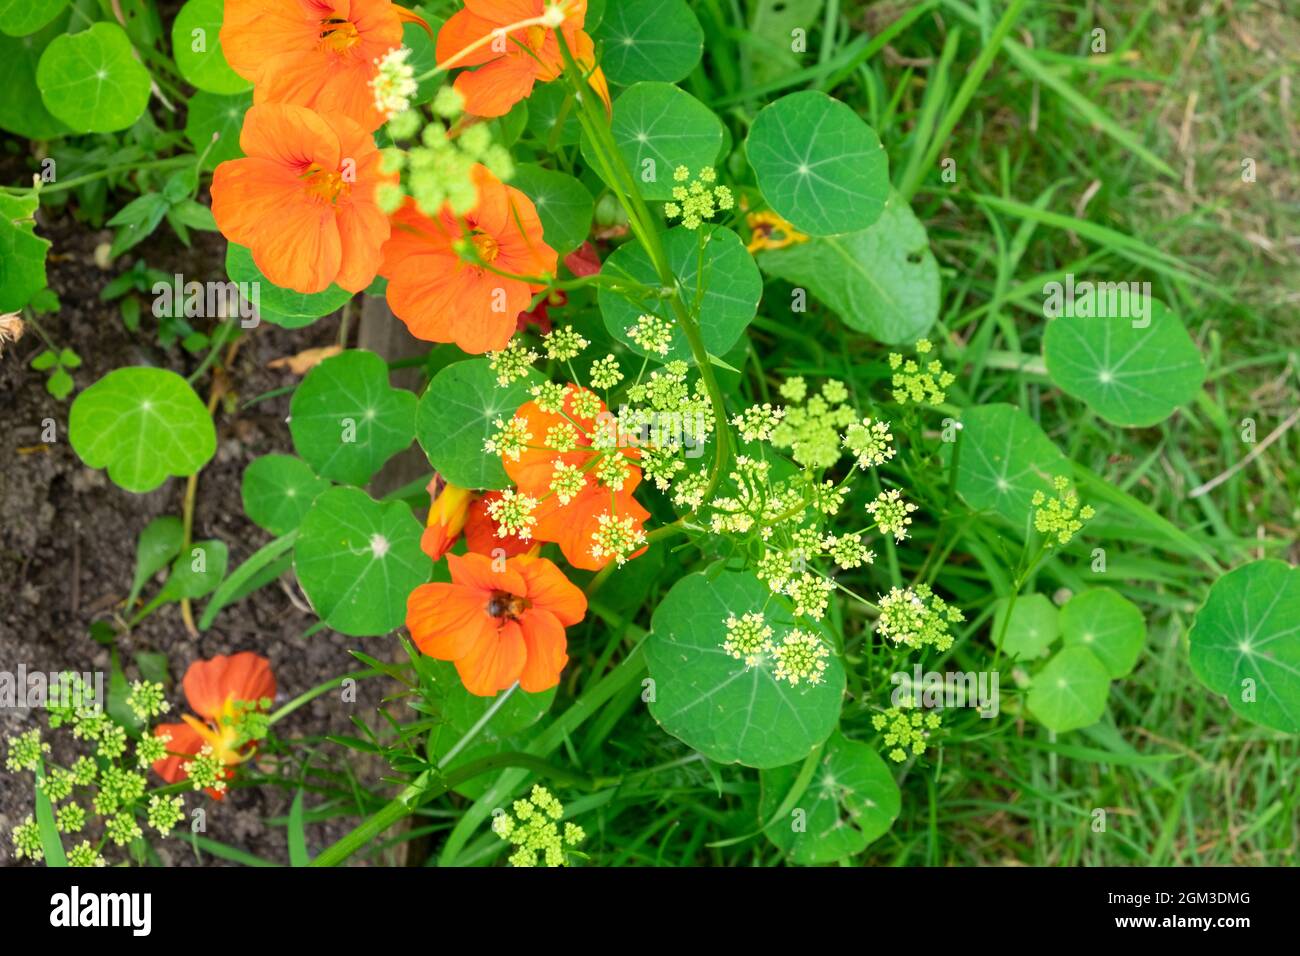 Orange nasturtium flowers nasturtiums growing and parsley plant gone to seeds view from above in September garden Dyfed Wales UK KATHY DEWITT Stock Photo